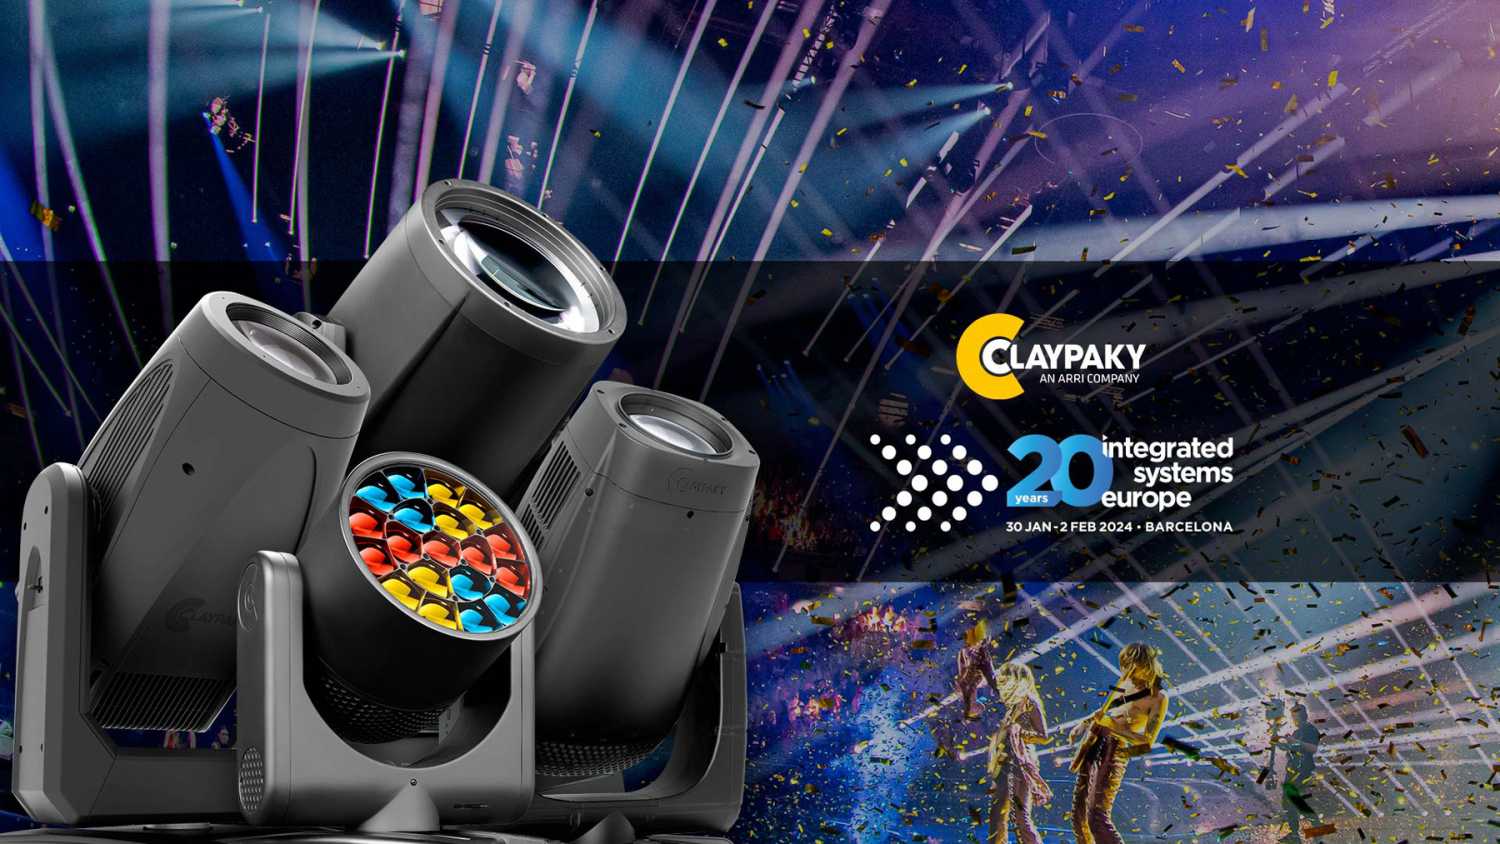 Claypaky will be showcasing its recently launched products for all kinds of events